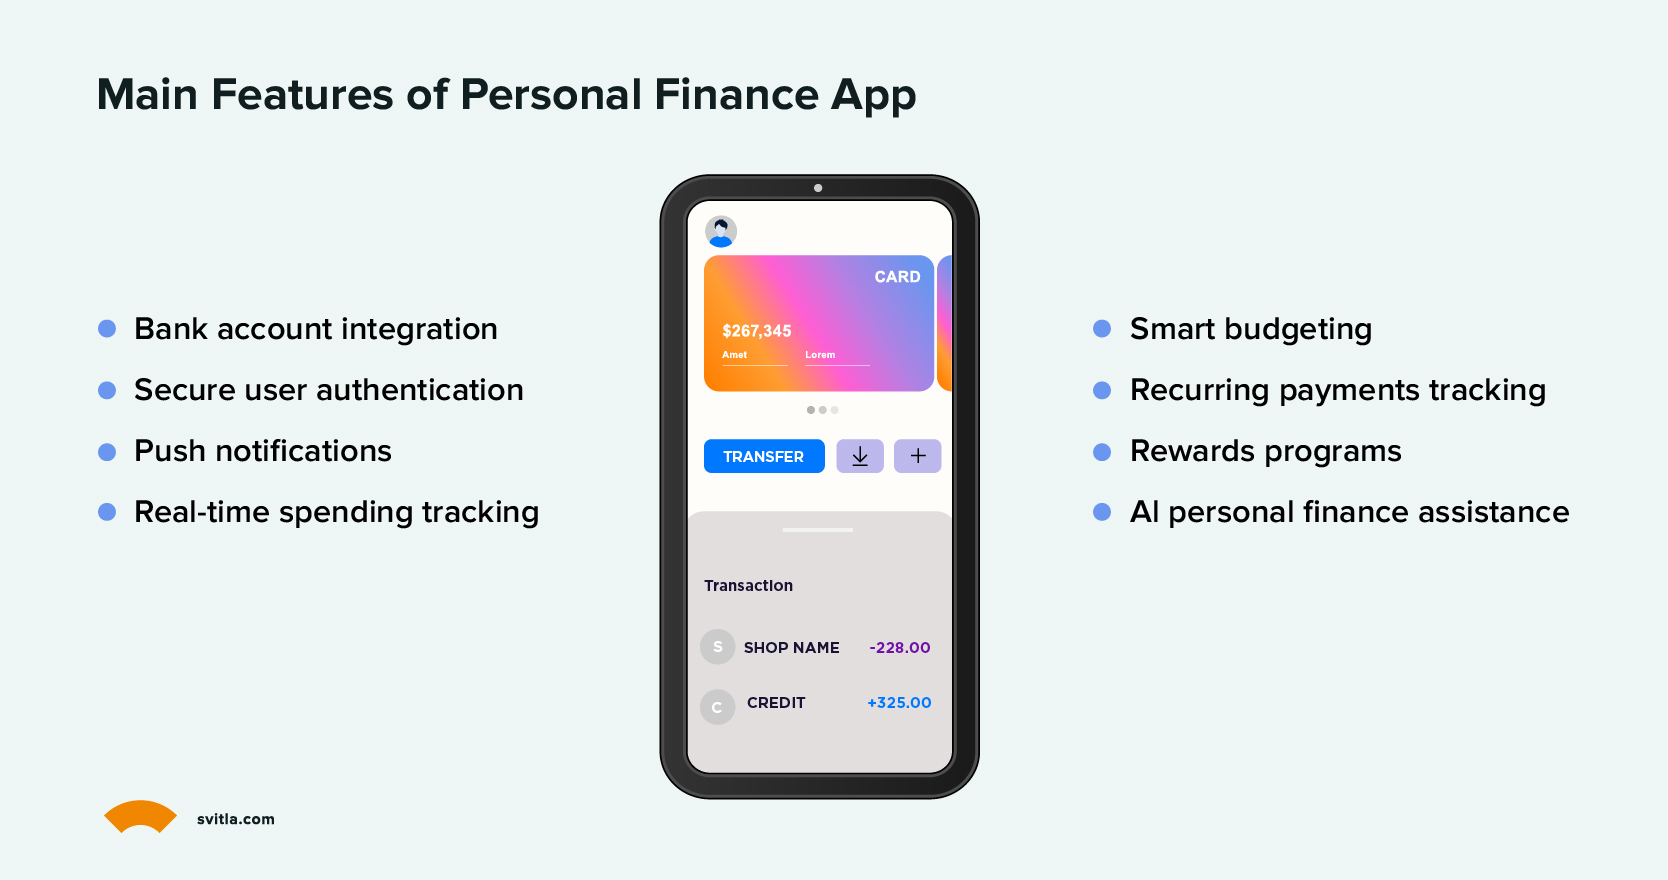 Main Features of Personal Finance App